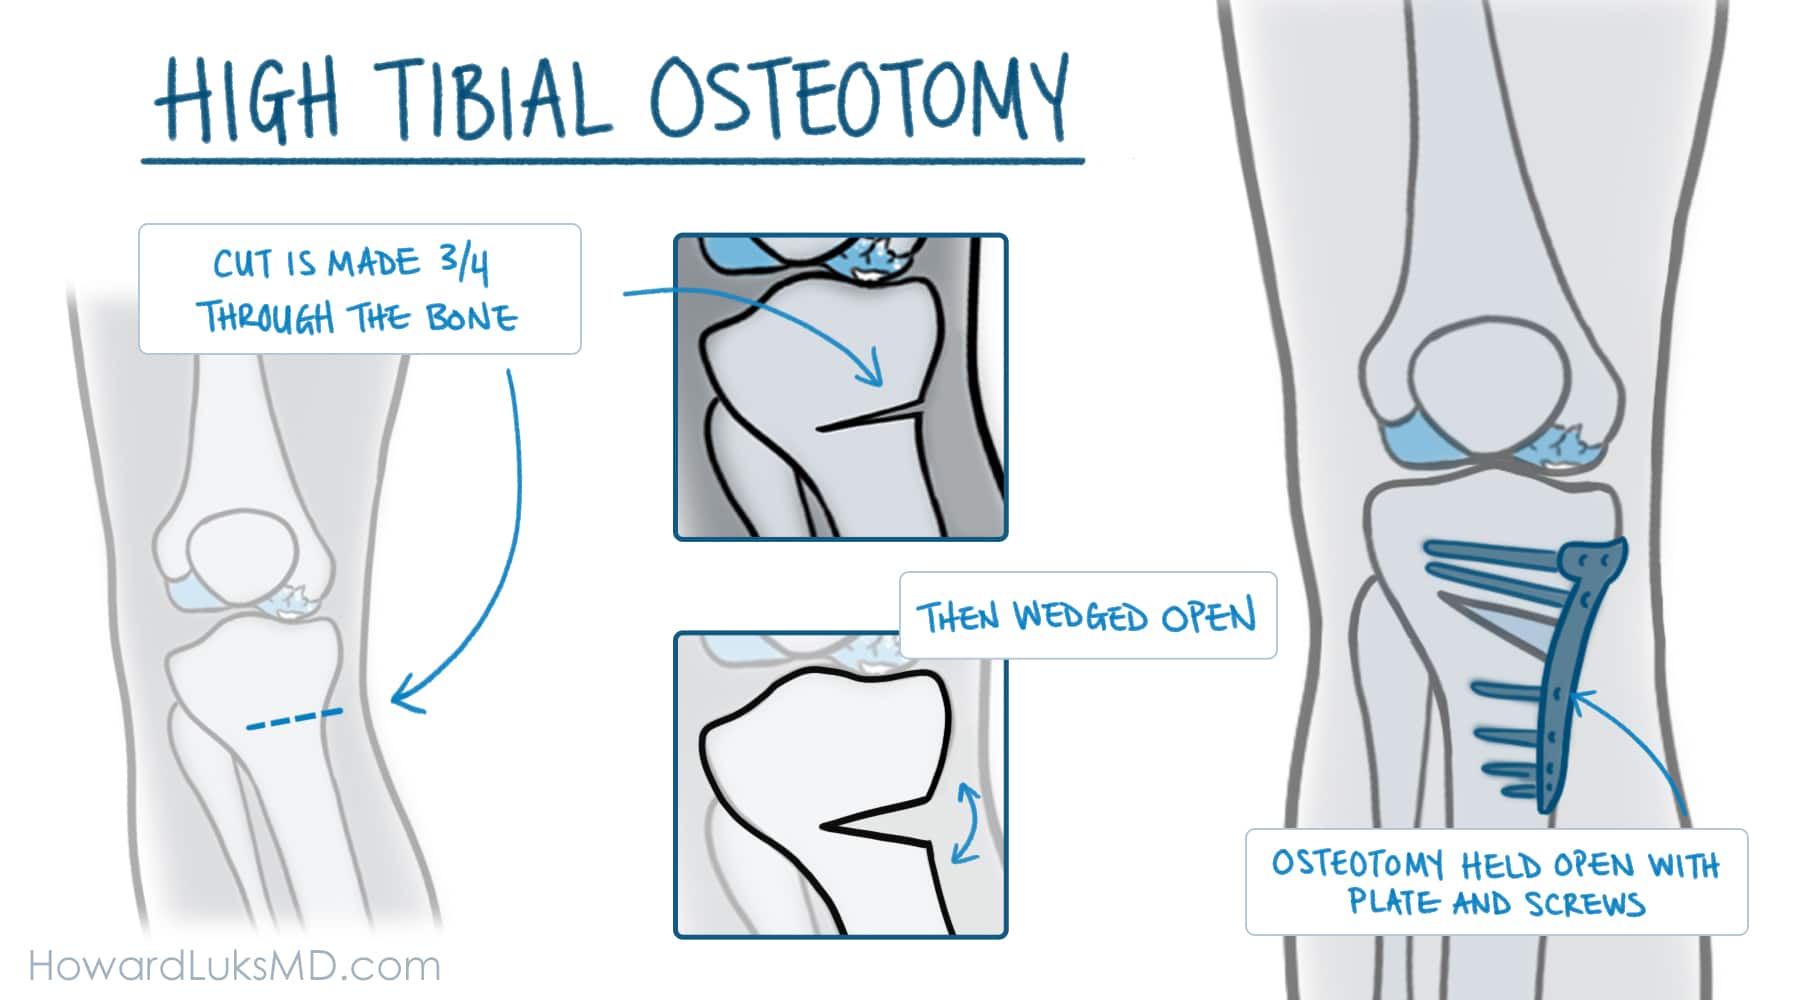 High Tibial Osteotomy For Knee Arthritis Pain In Active People